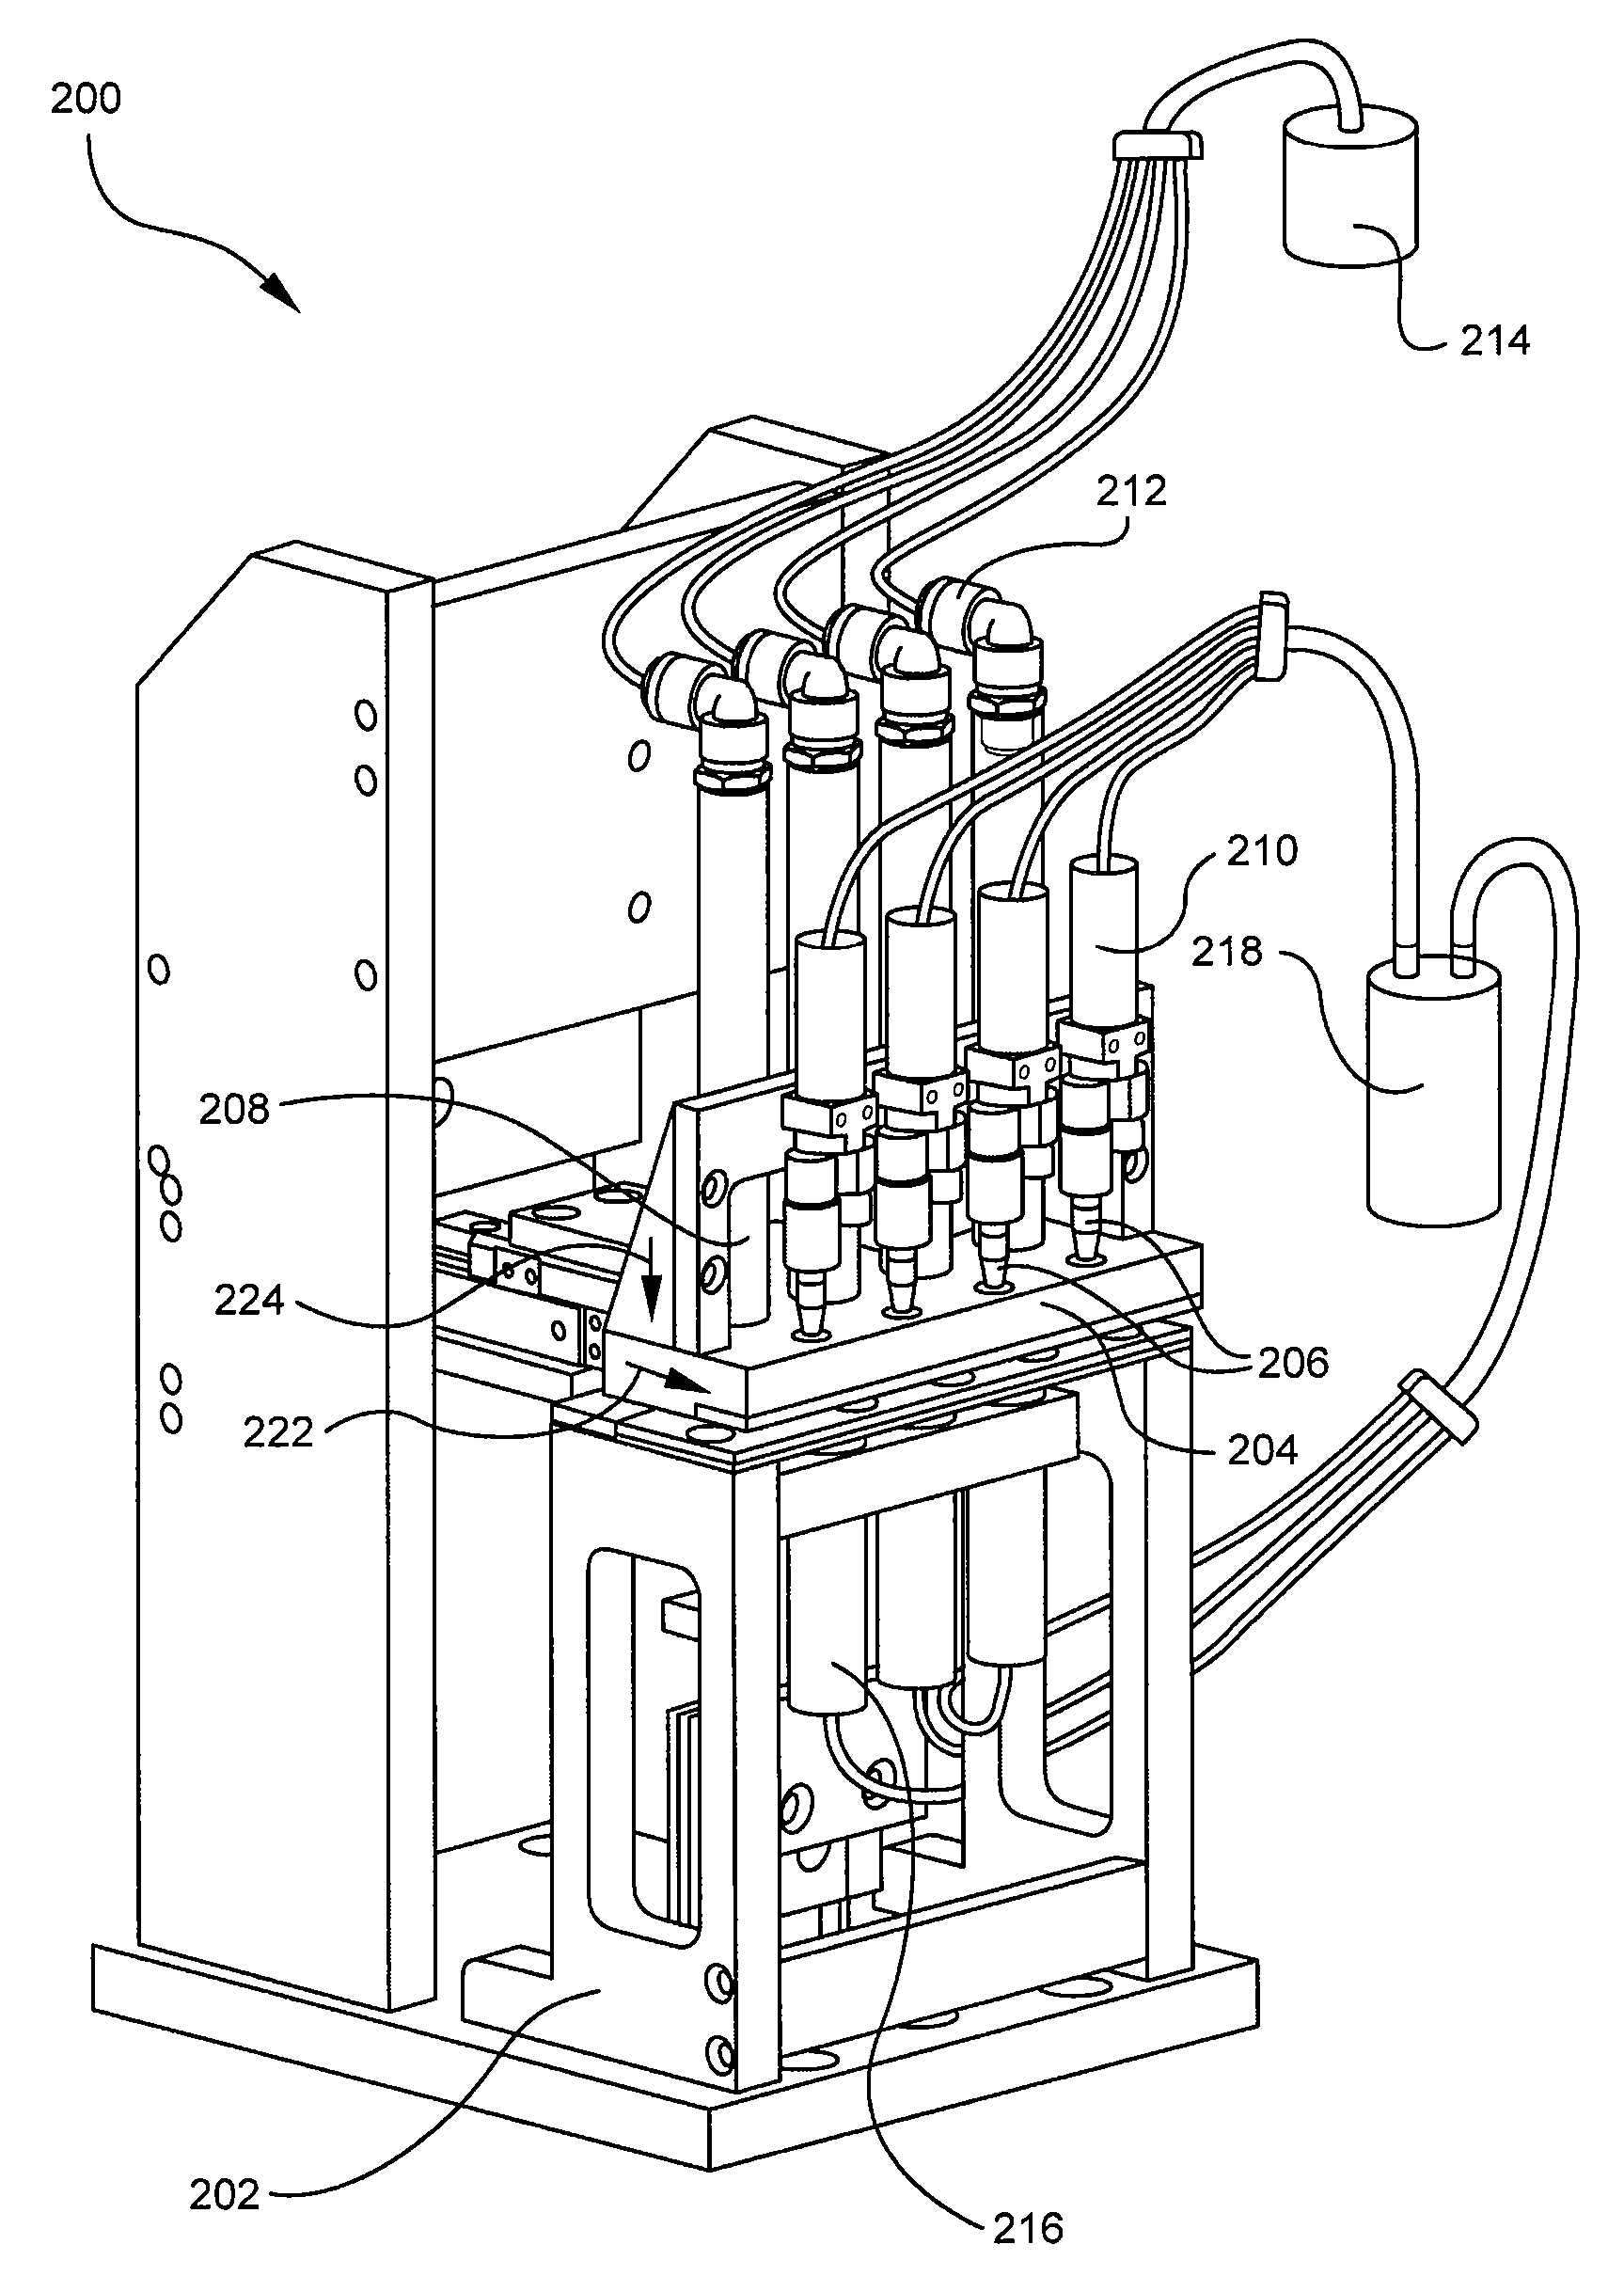 Systems and methods for applying an antimicrobial coating to a medical device